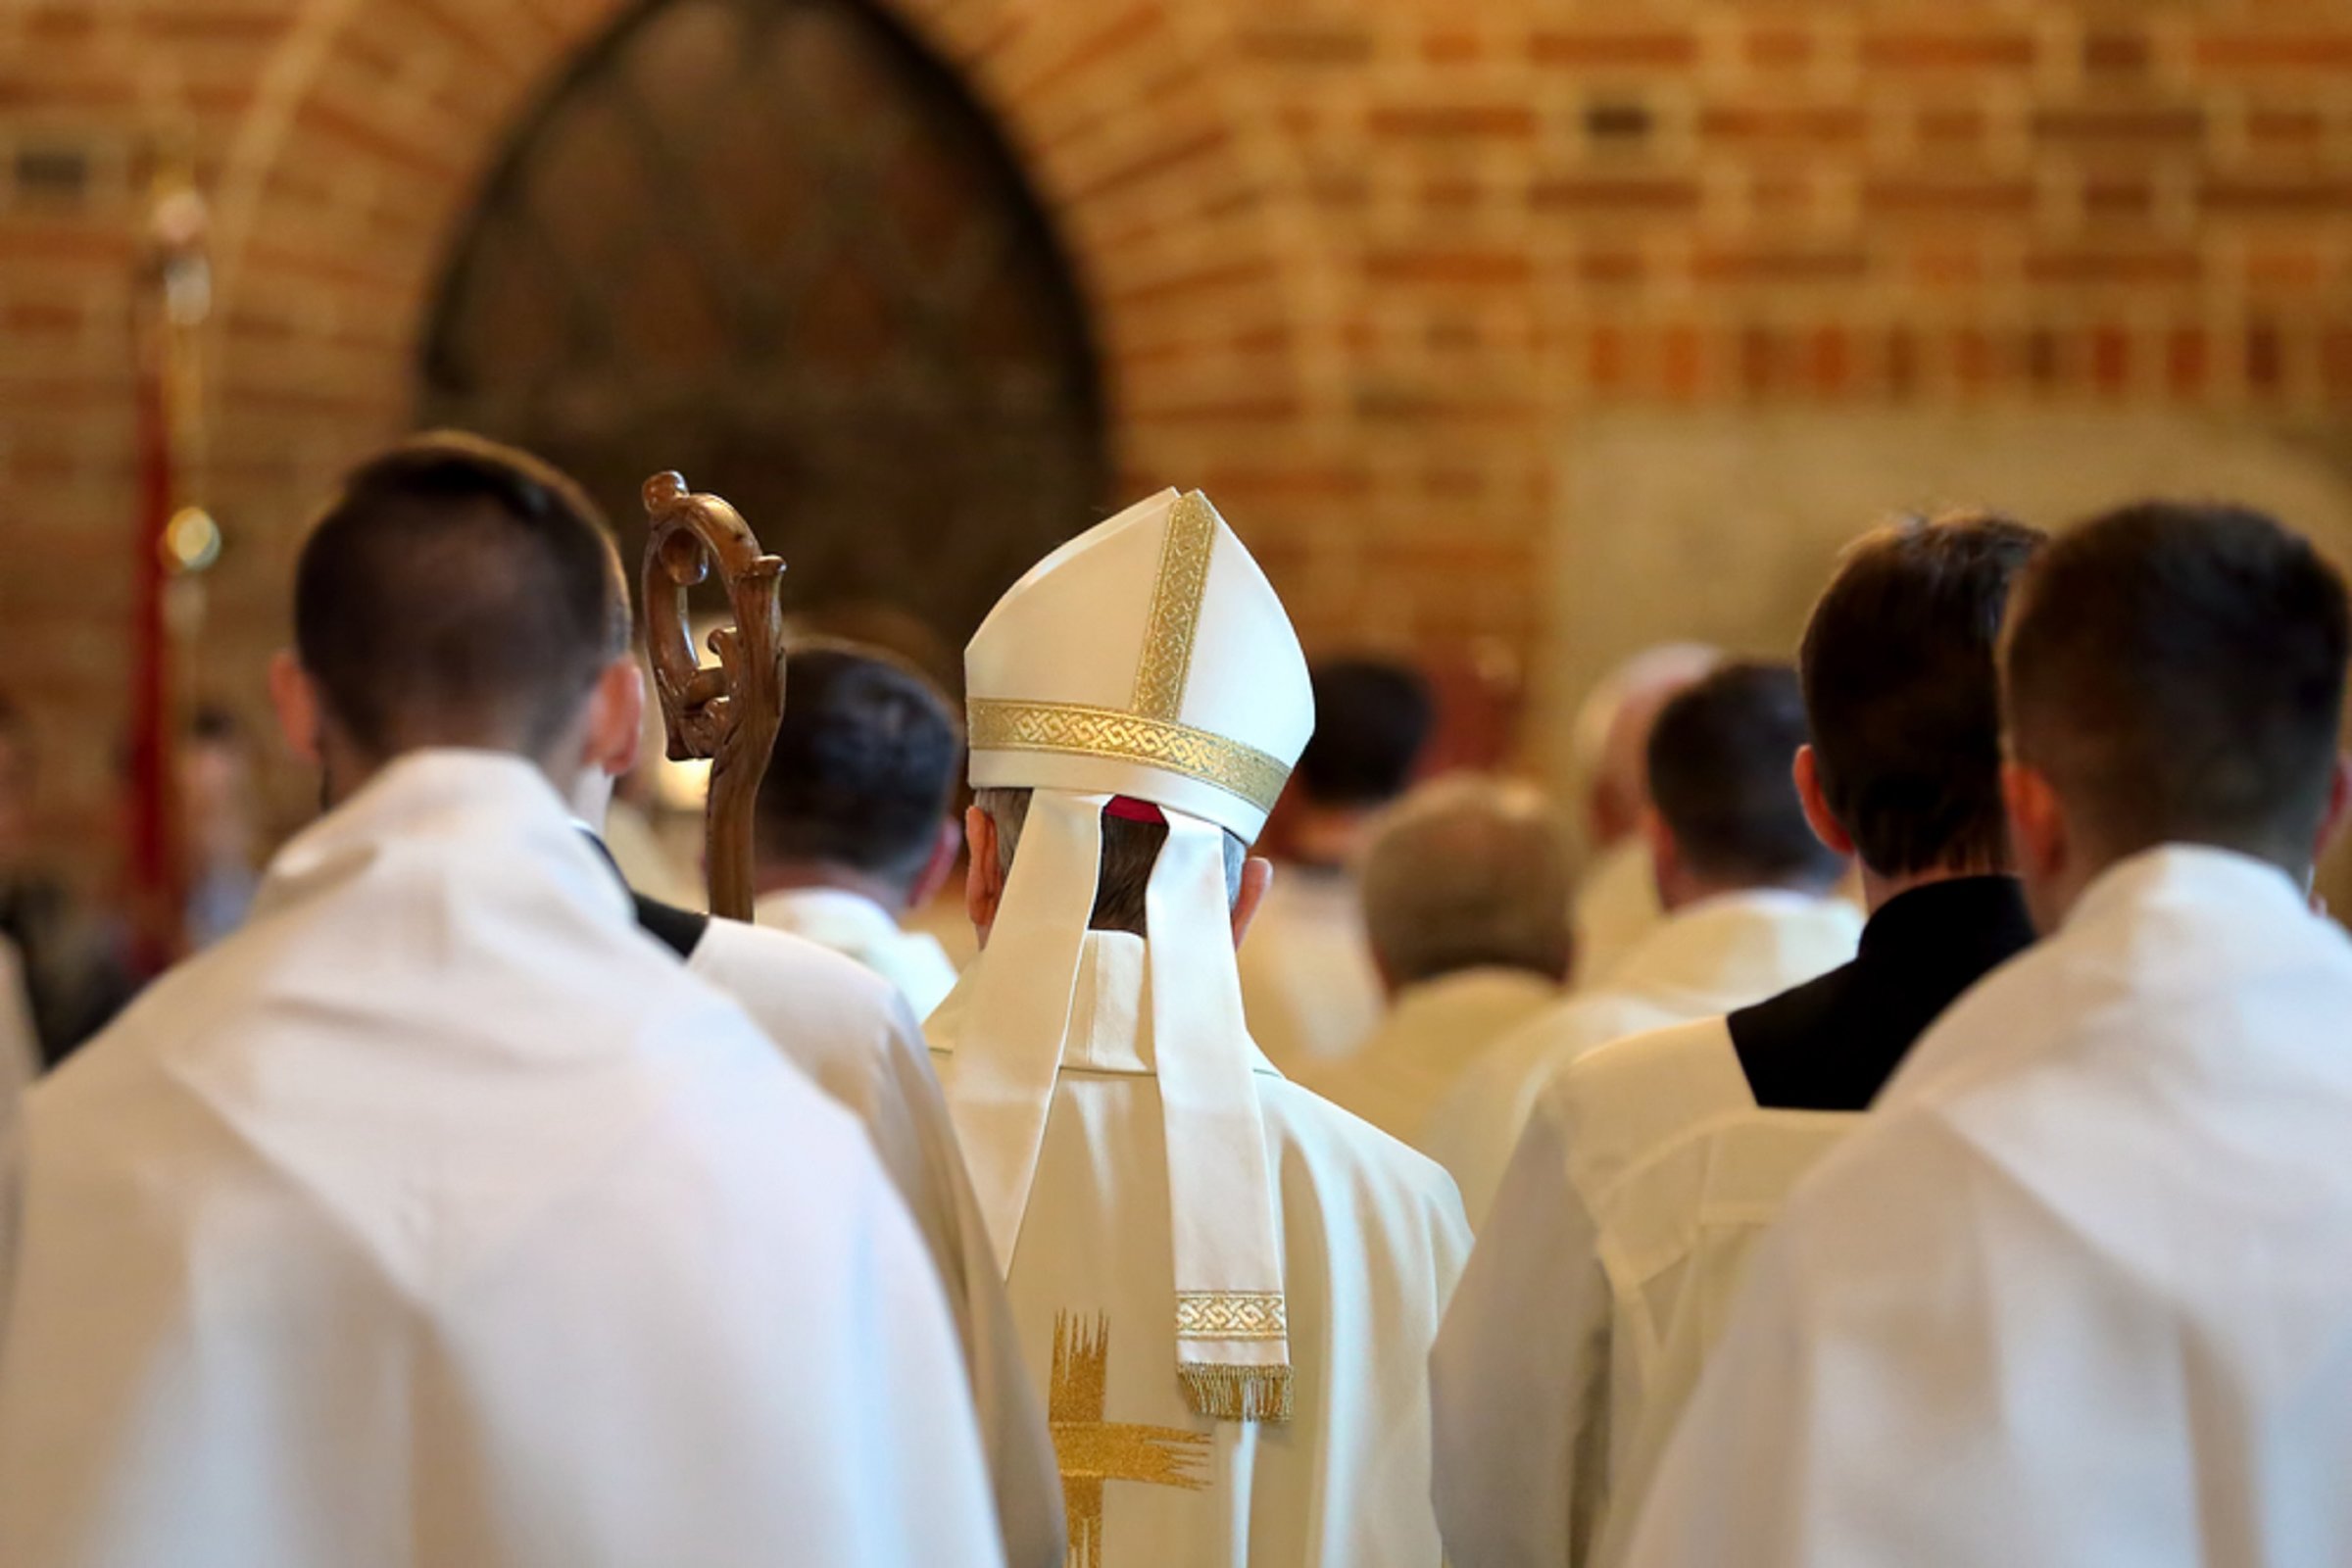 That they all may be one: Insights into contemporary ecumenism